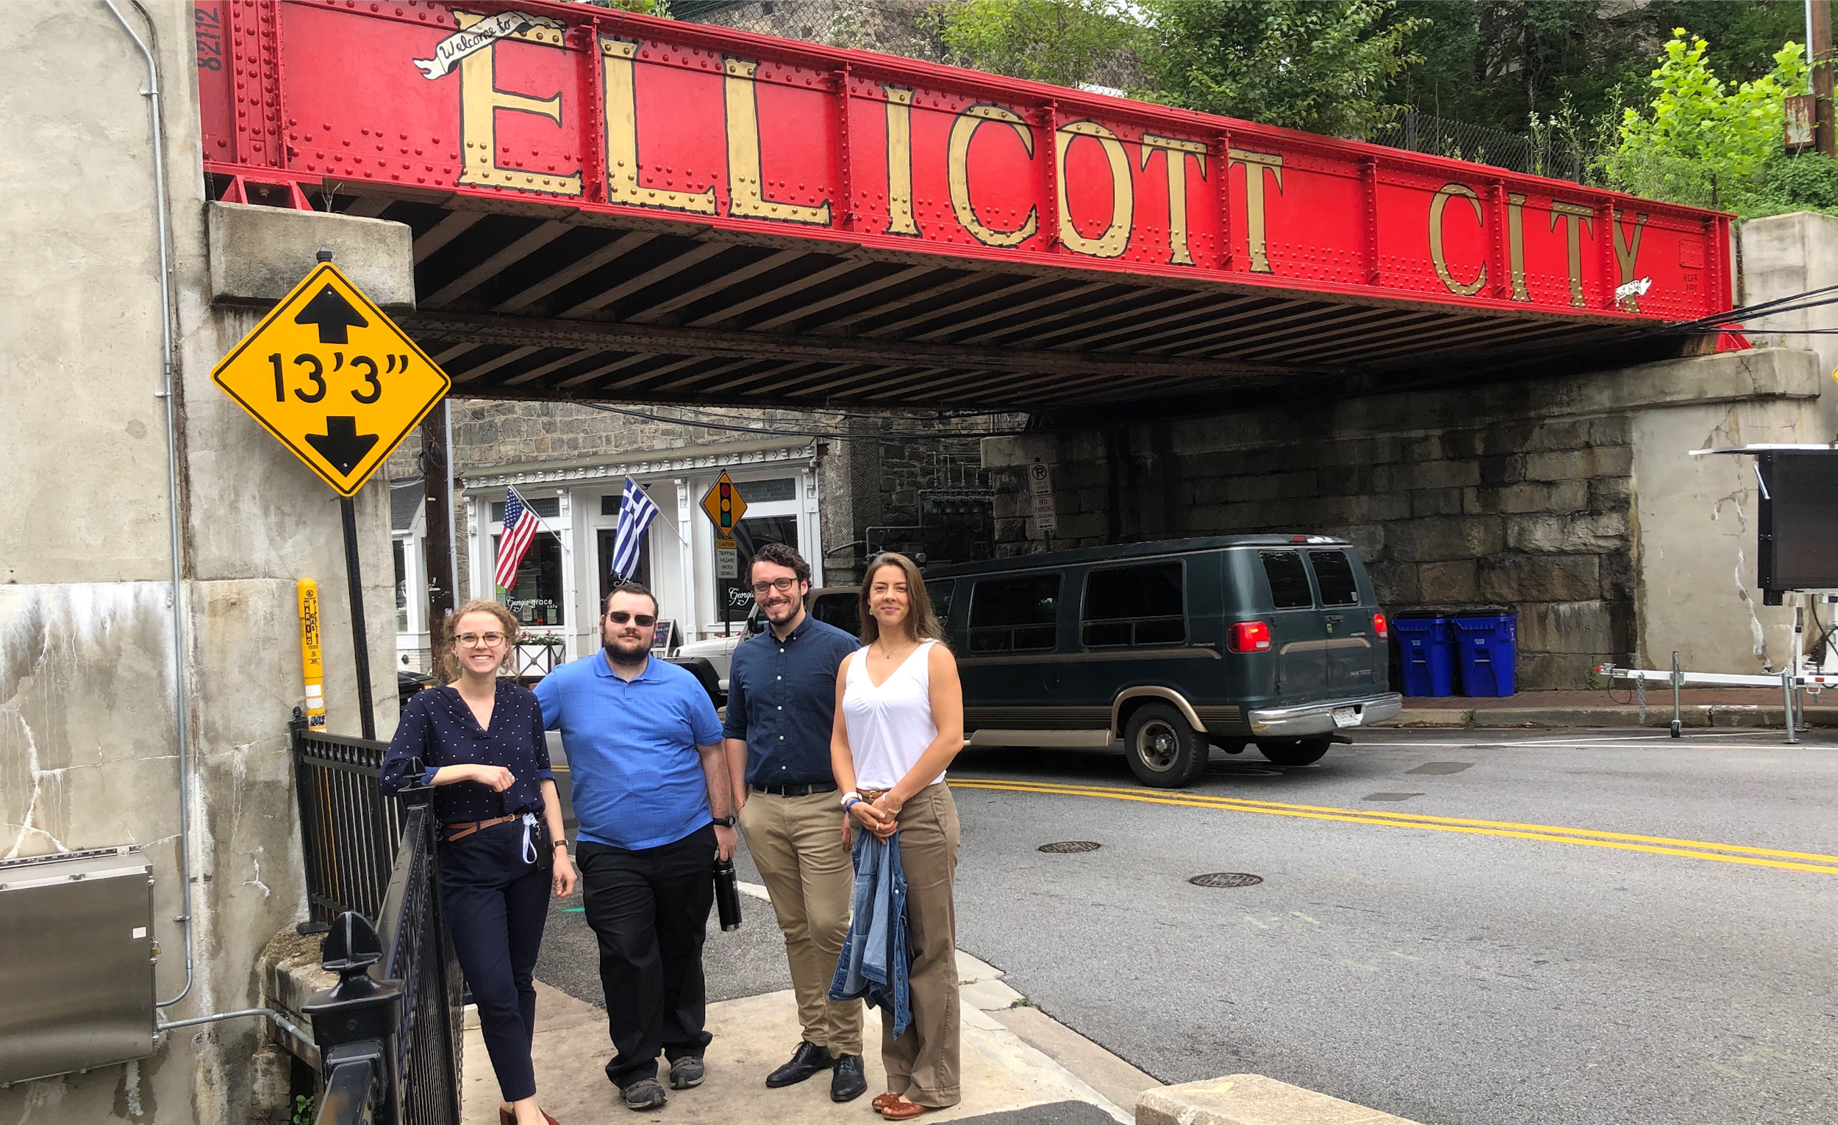 Members of the Ellicott City Disasters team visited Main Street the summer after the 2018 flood.